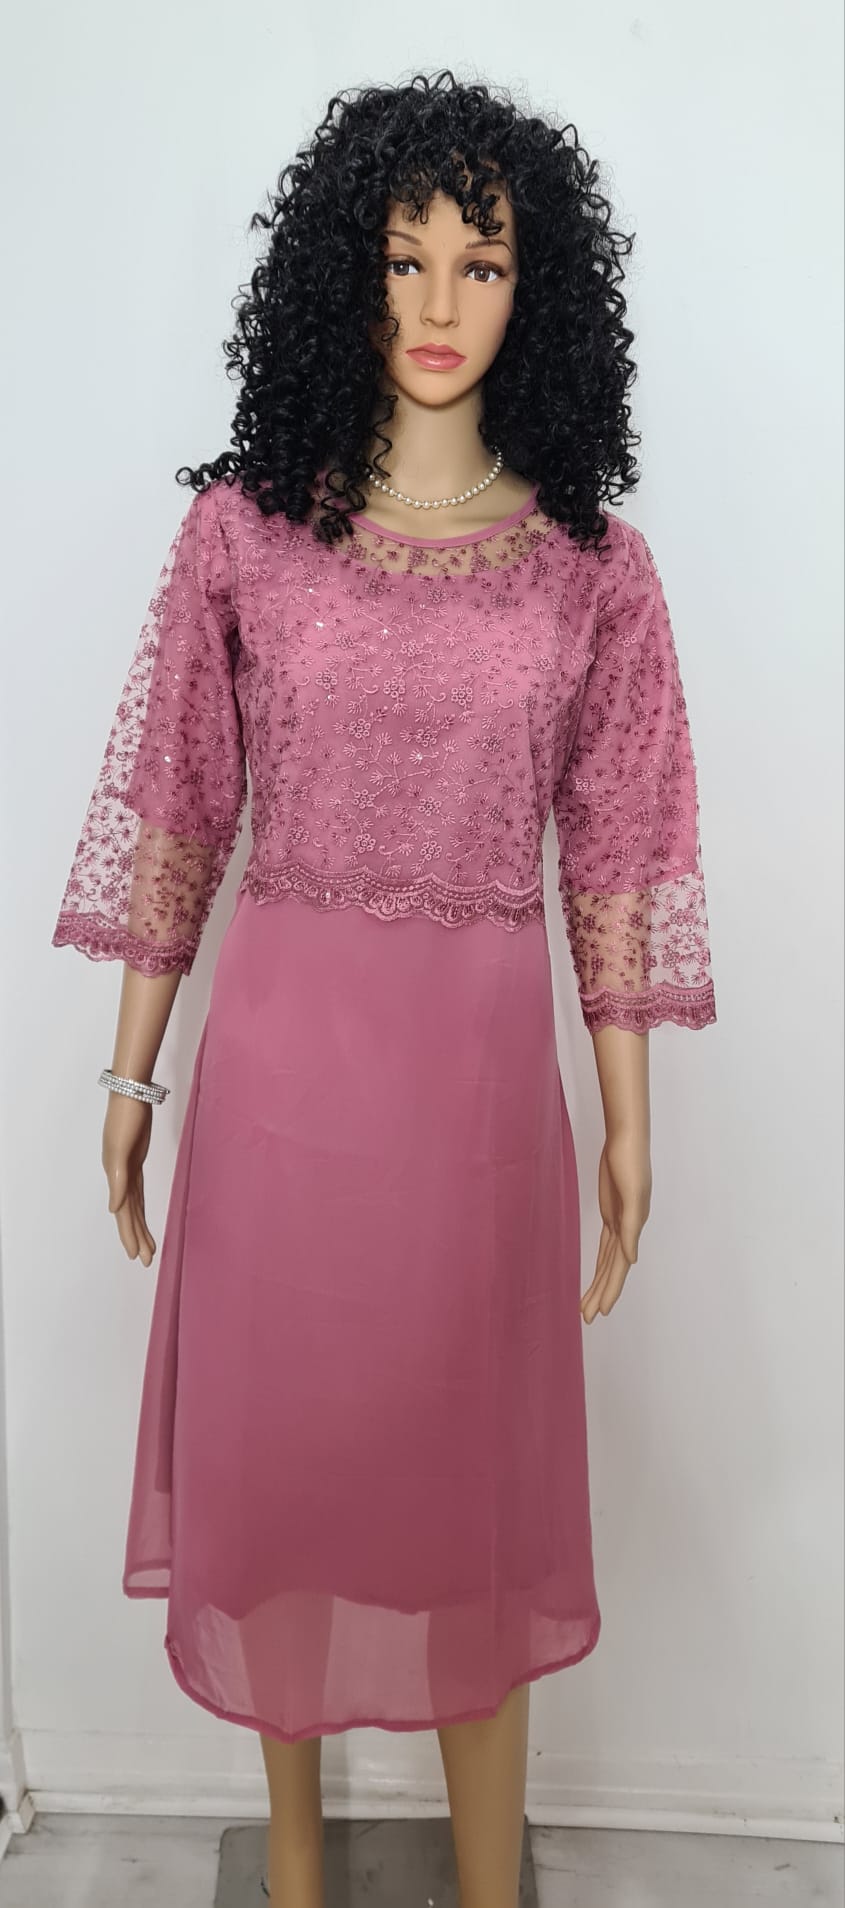 Georgette dress with lace work.